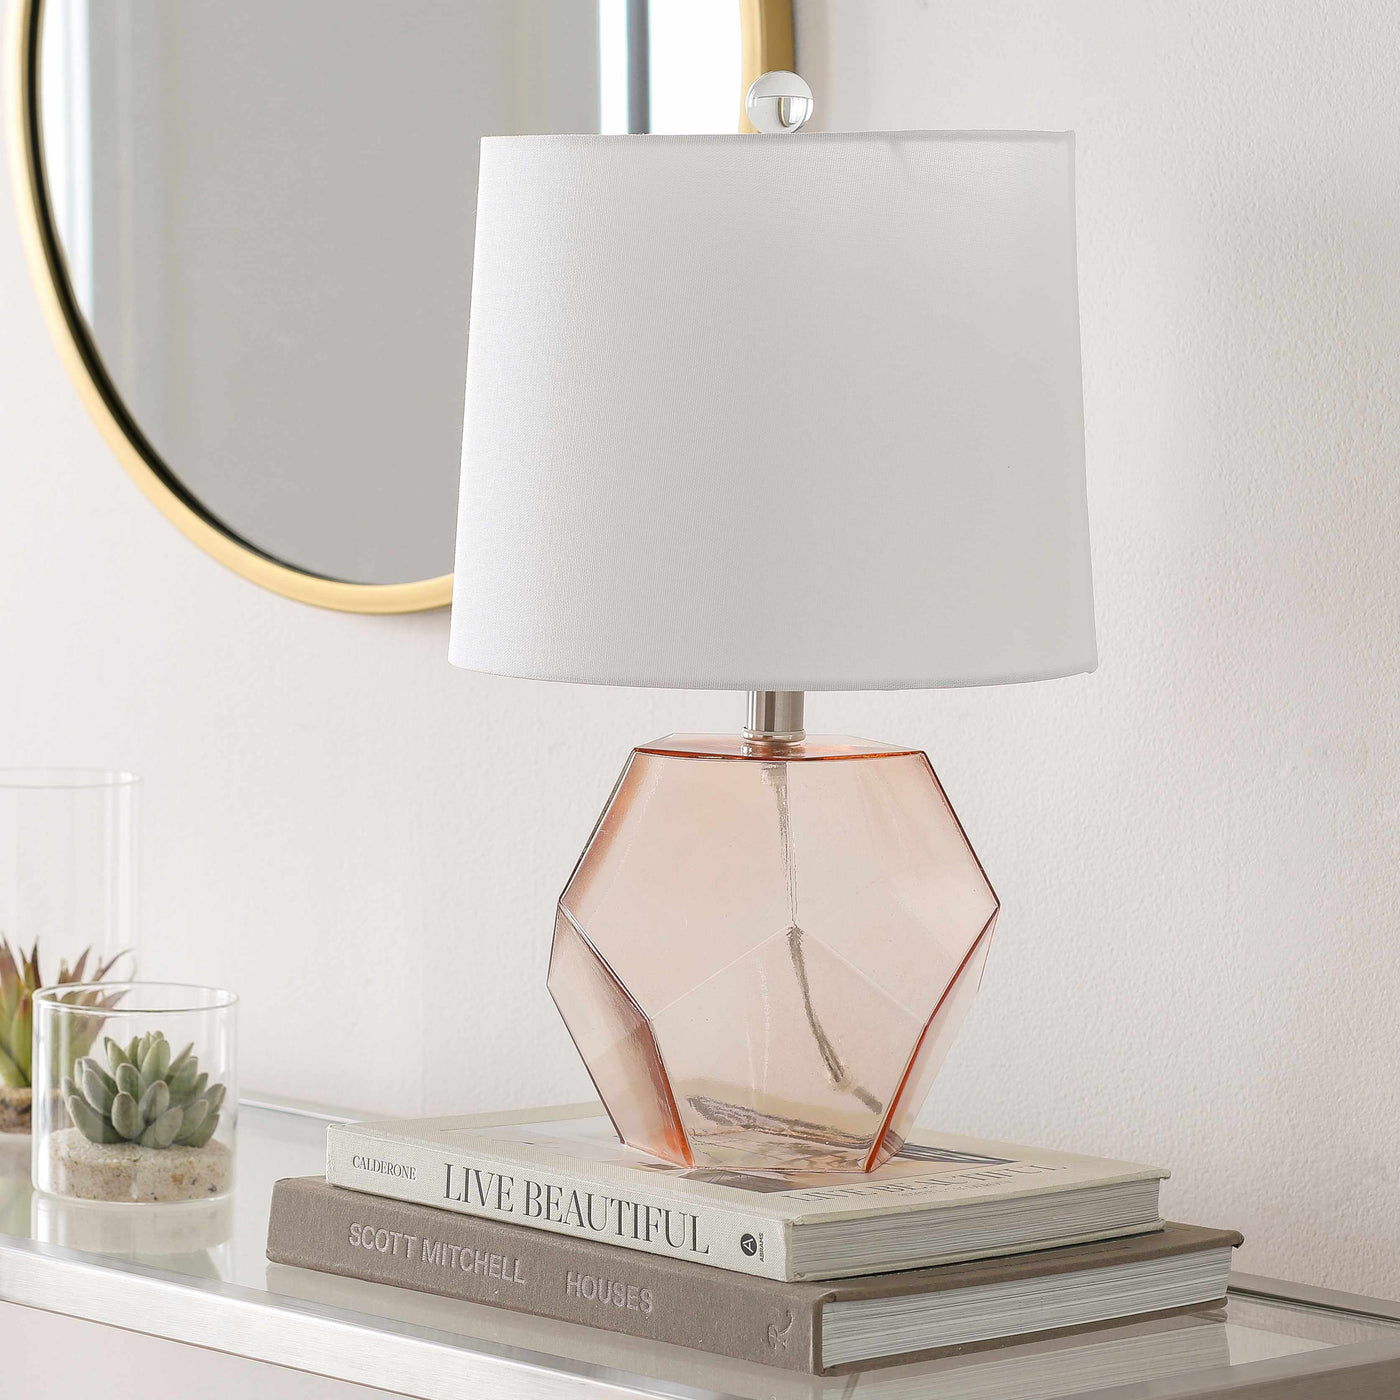 Jantianon Table Lamp